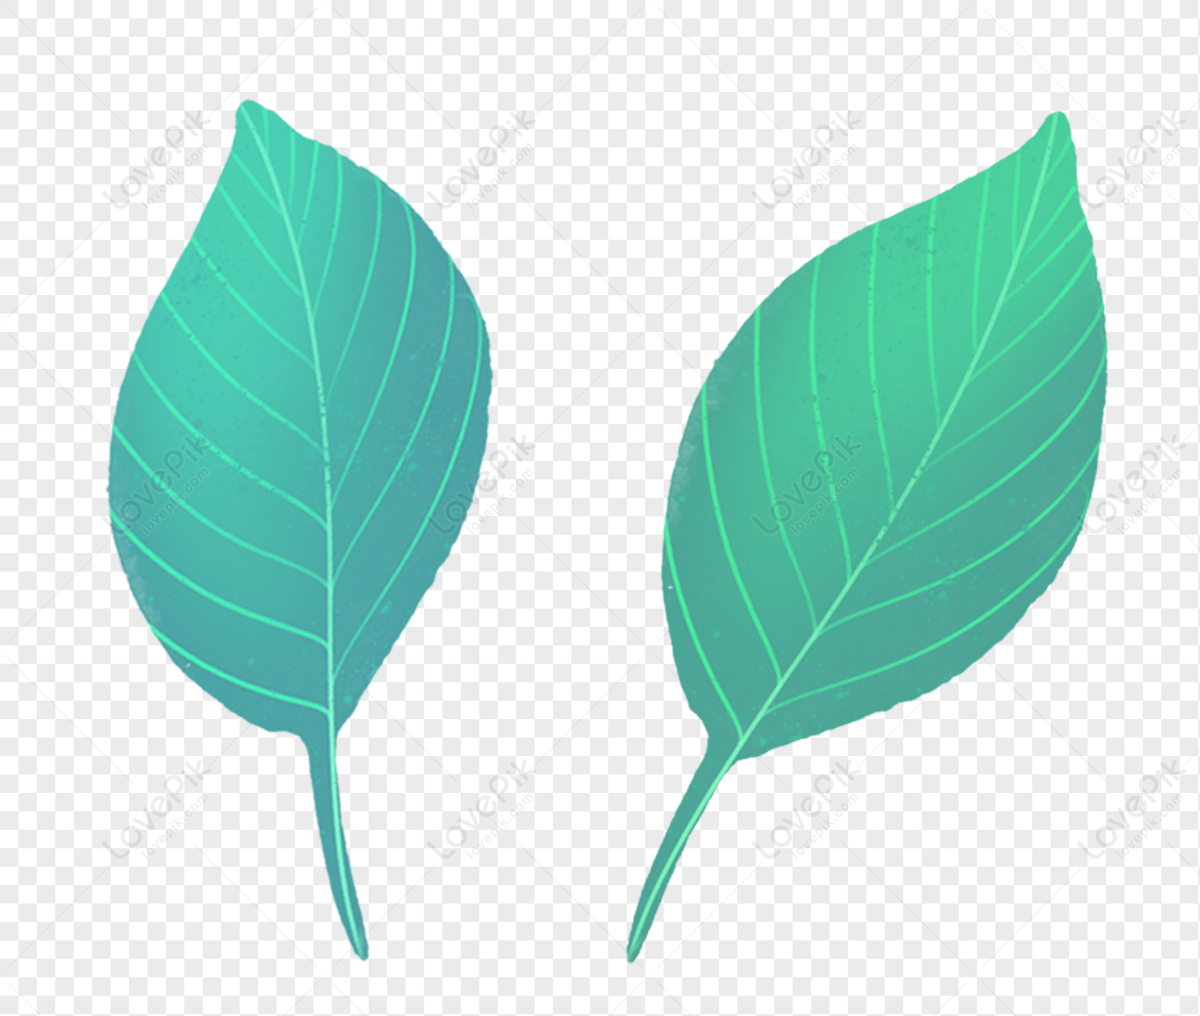 plant-leaves-green-leaves-leaves-transparent-green-light-png-free